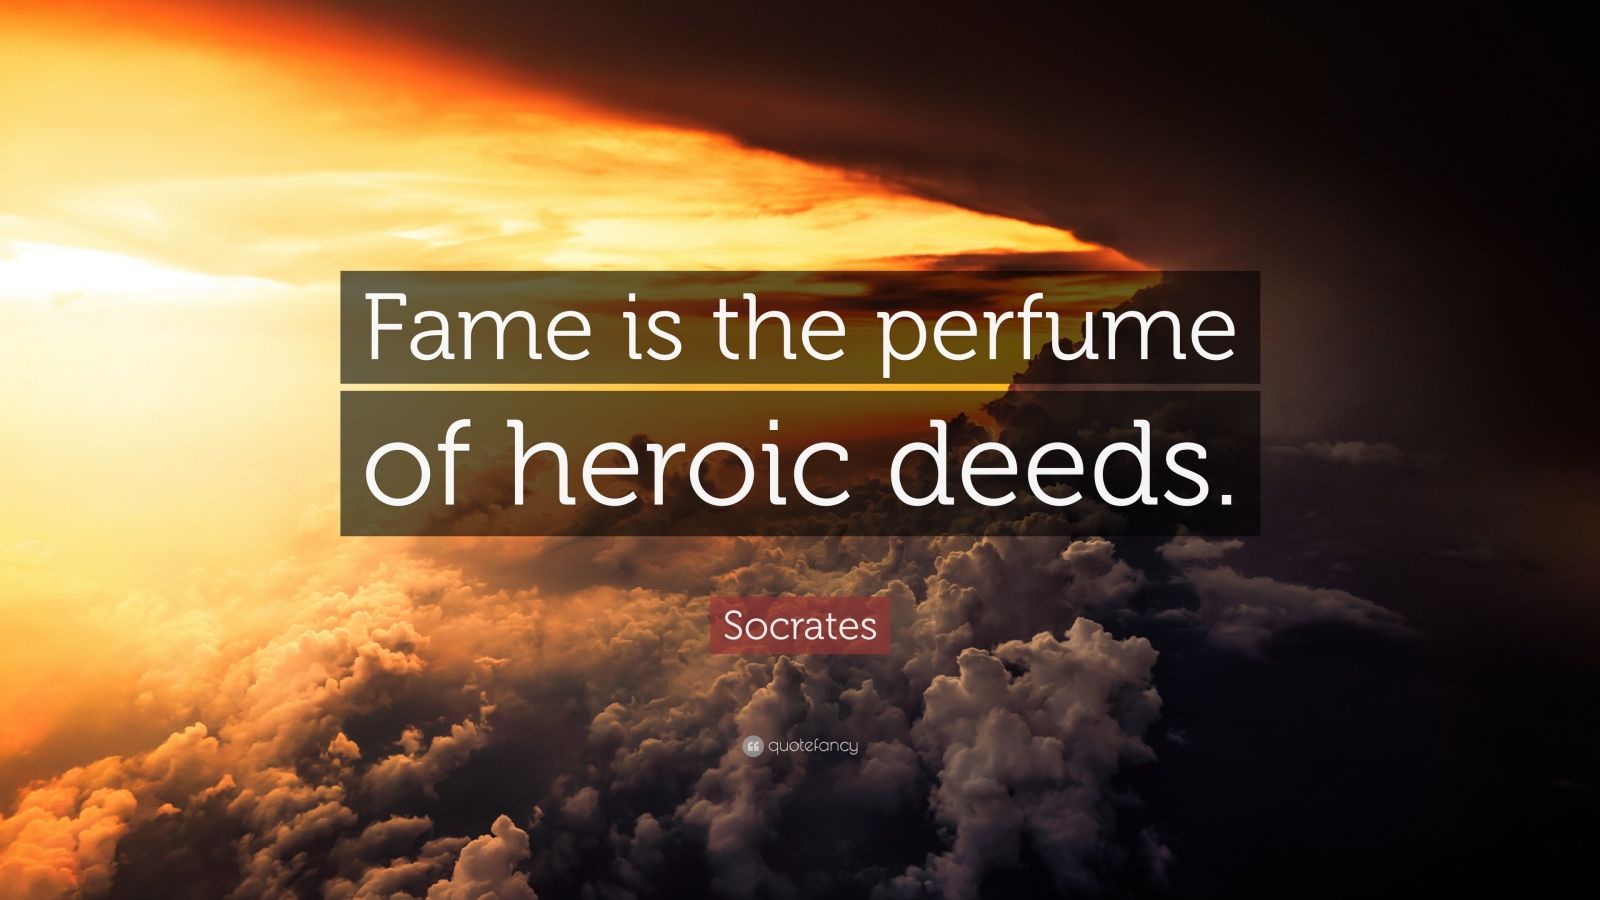 Socrates Quote: “Fame is the perfume of heroic deeds.” (6 wallpapers